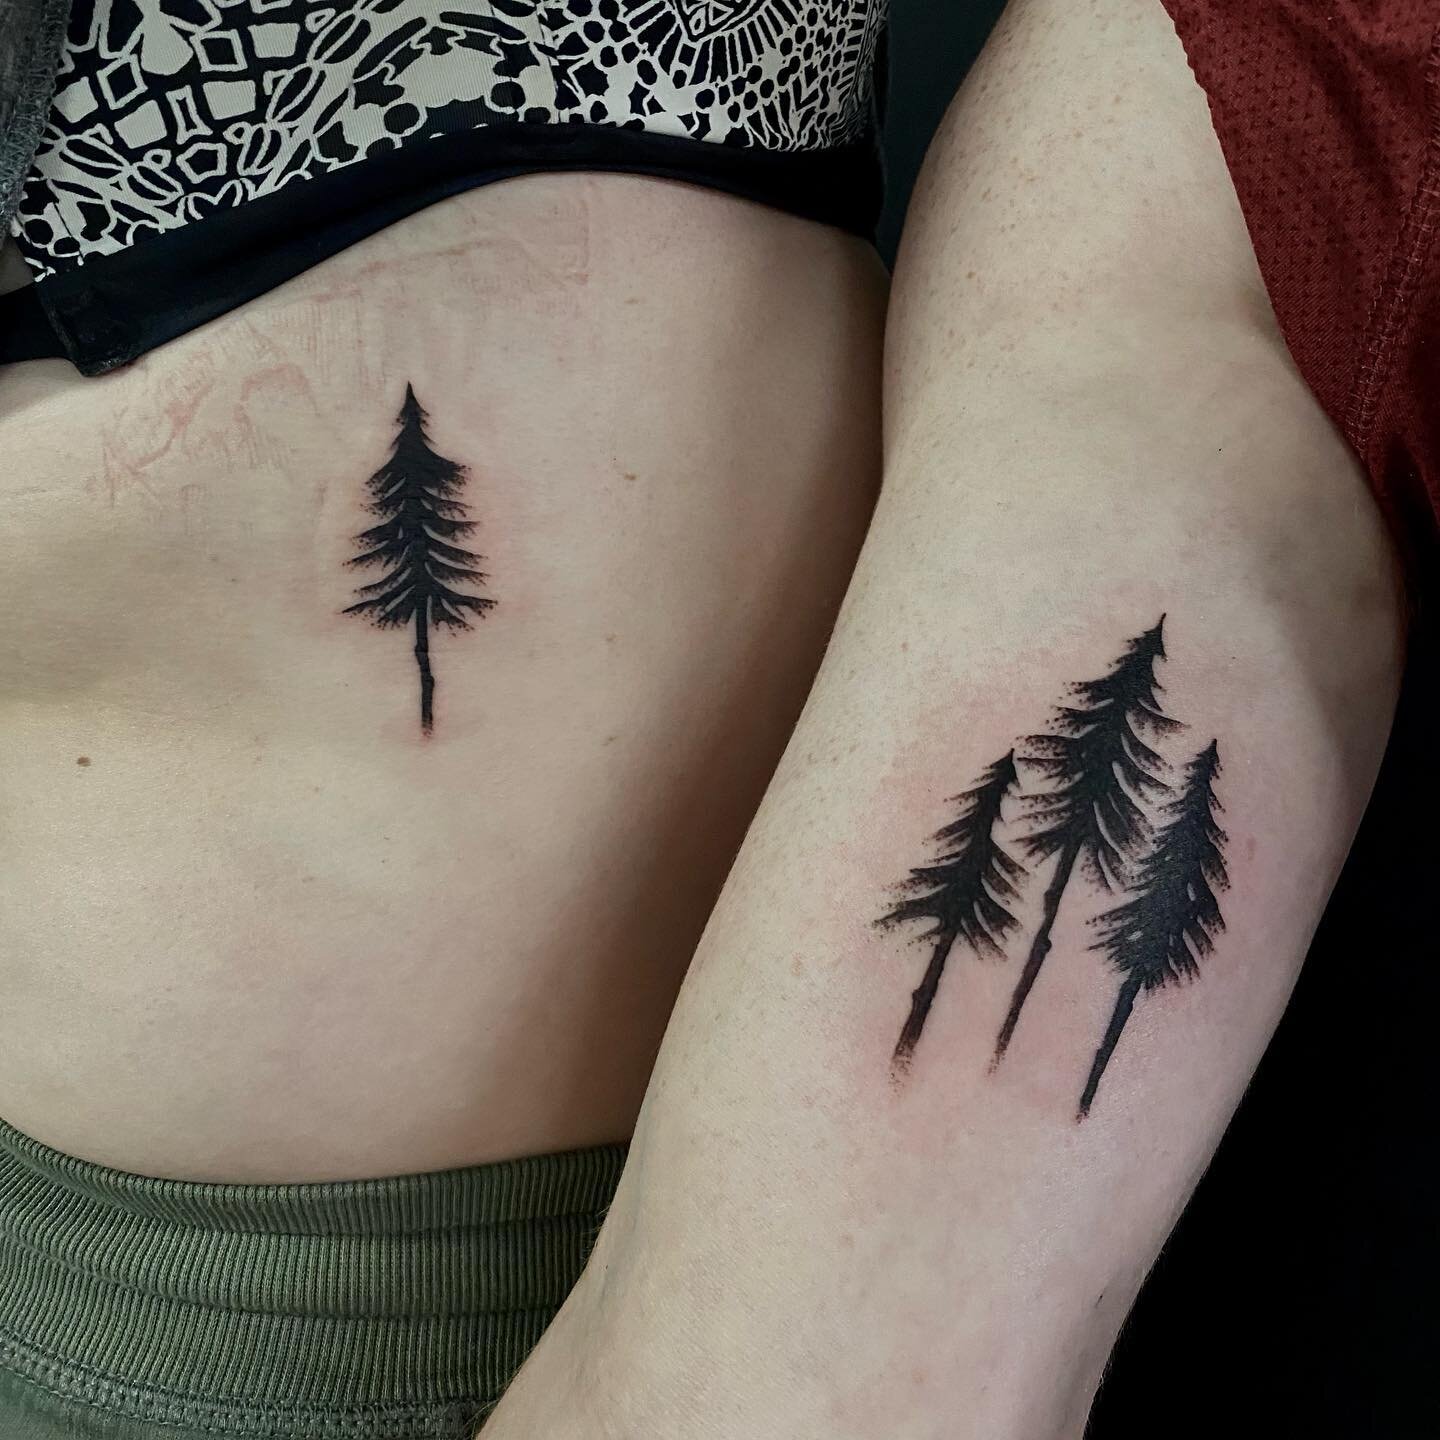 Did these cute matching tattoos today 🌲